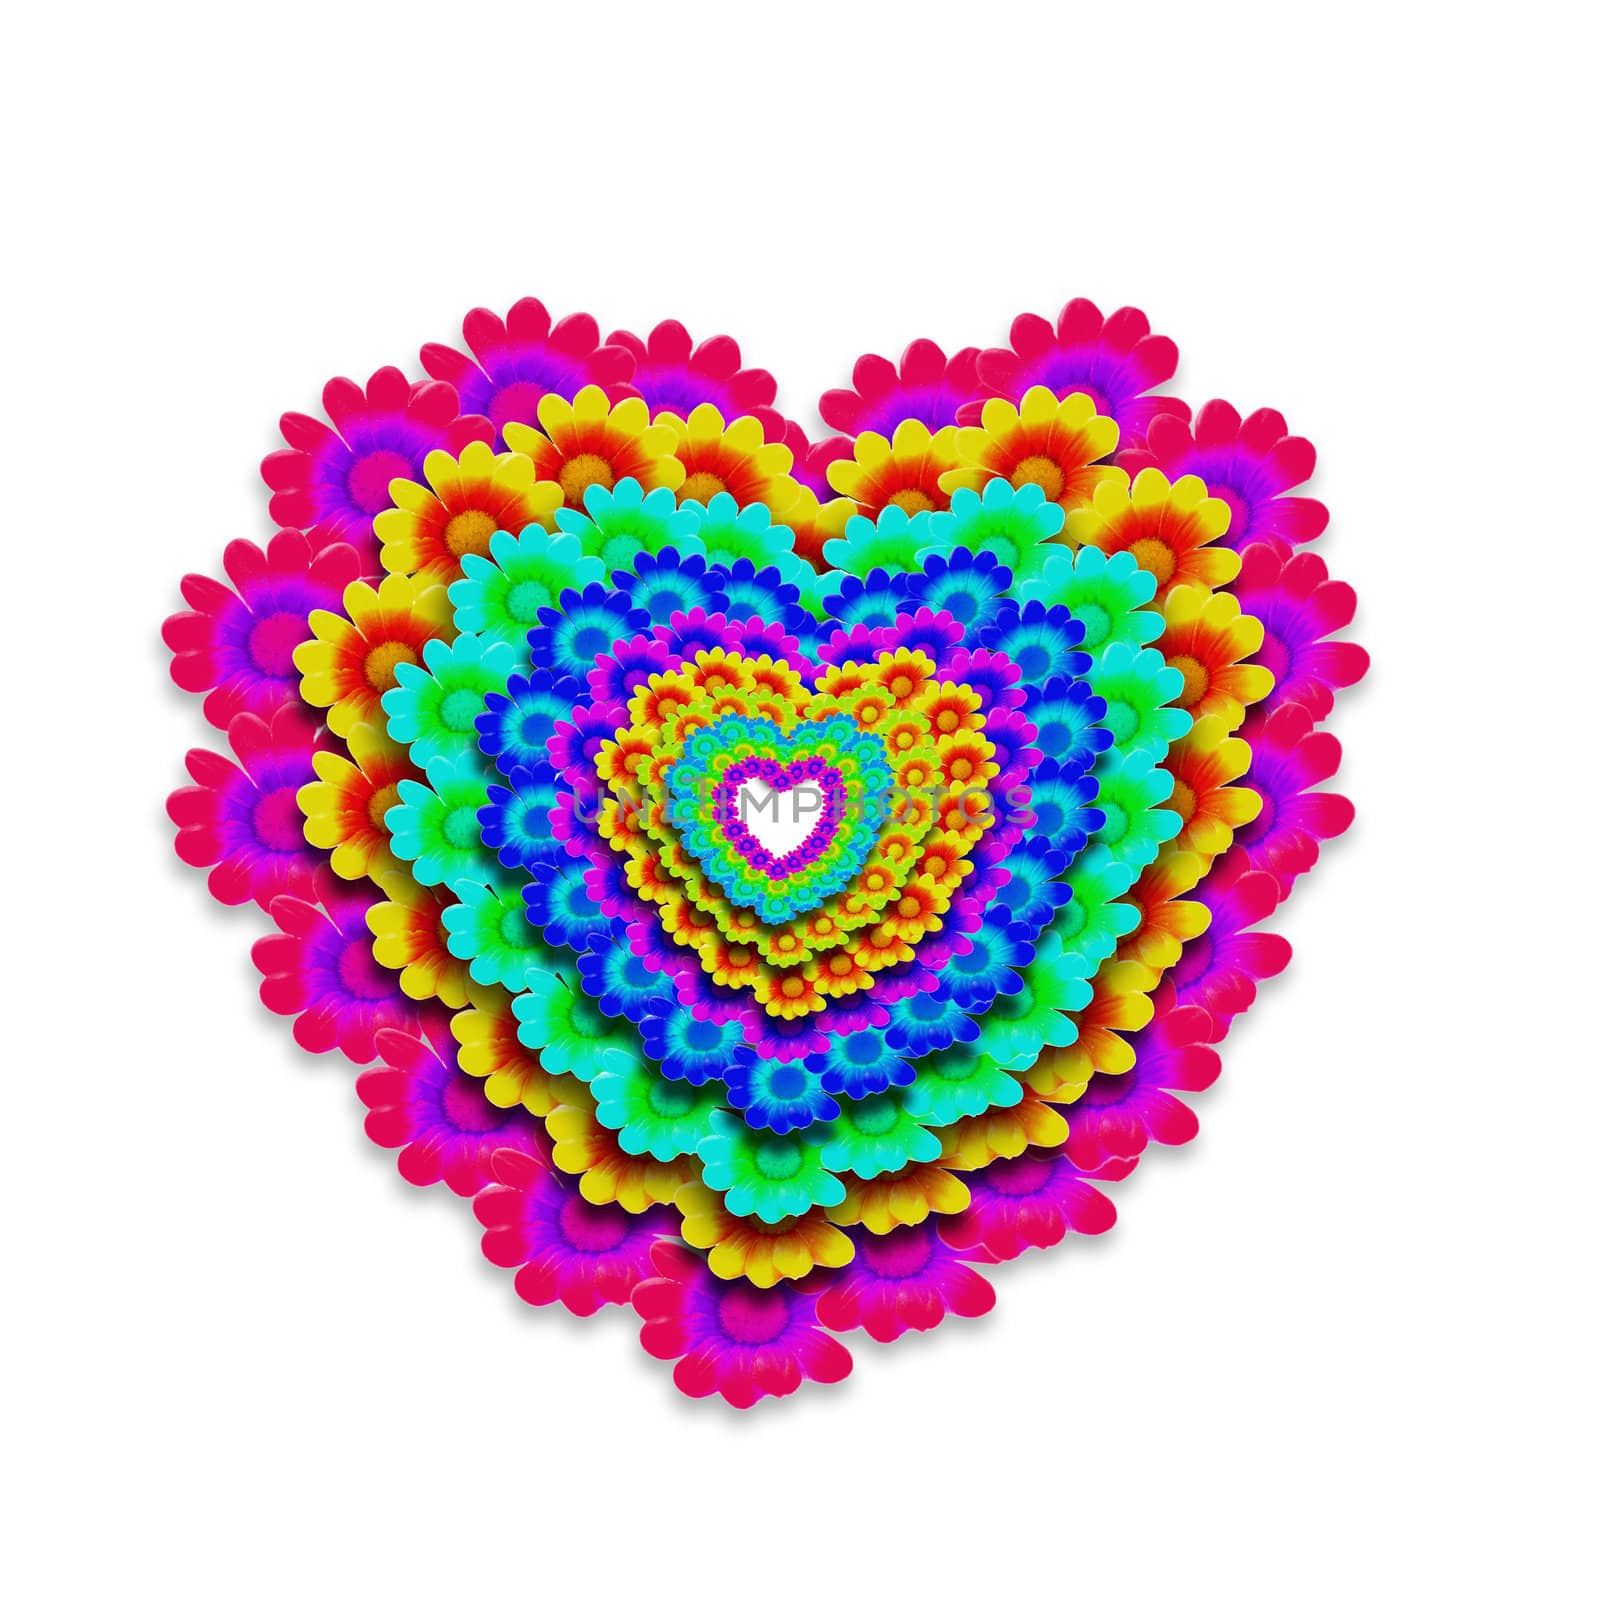 colorful heart happy by Carche